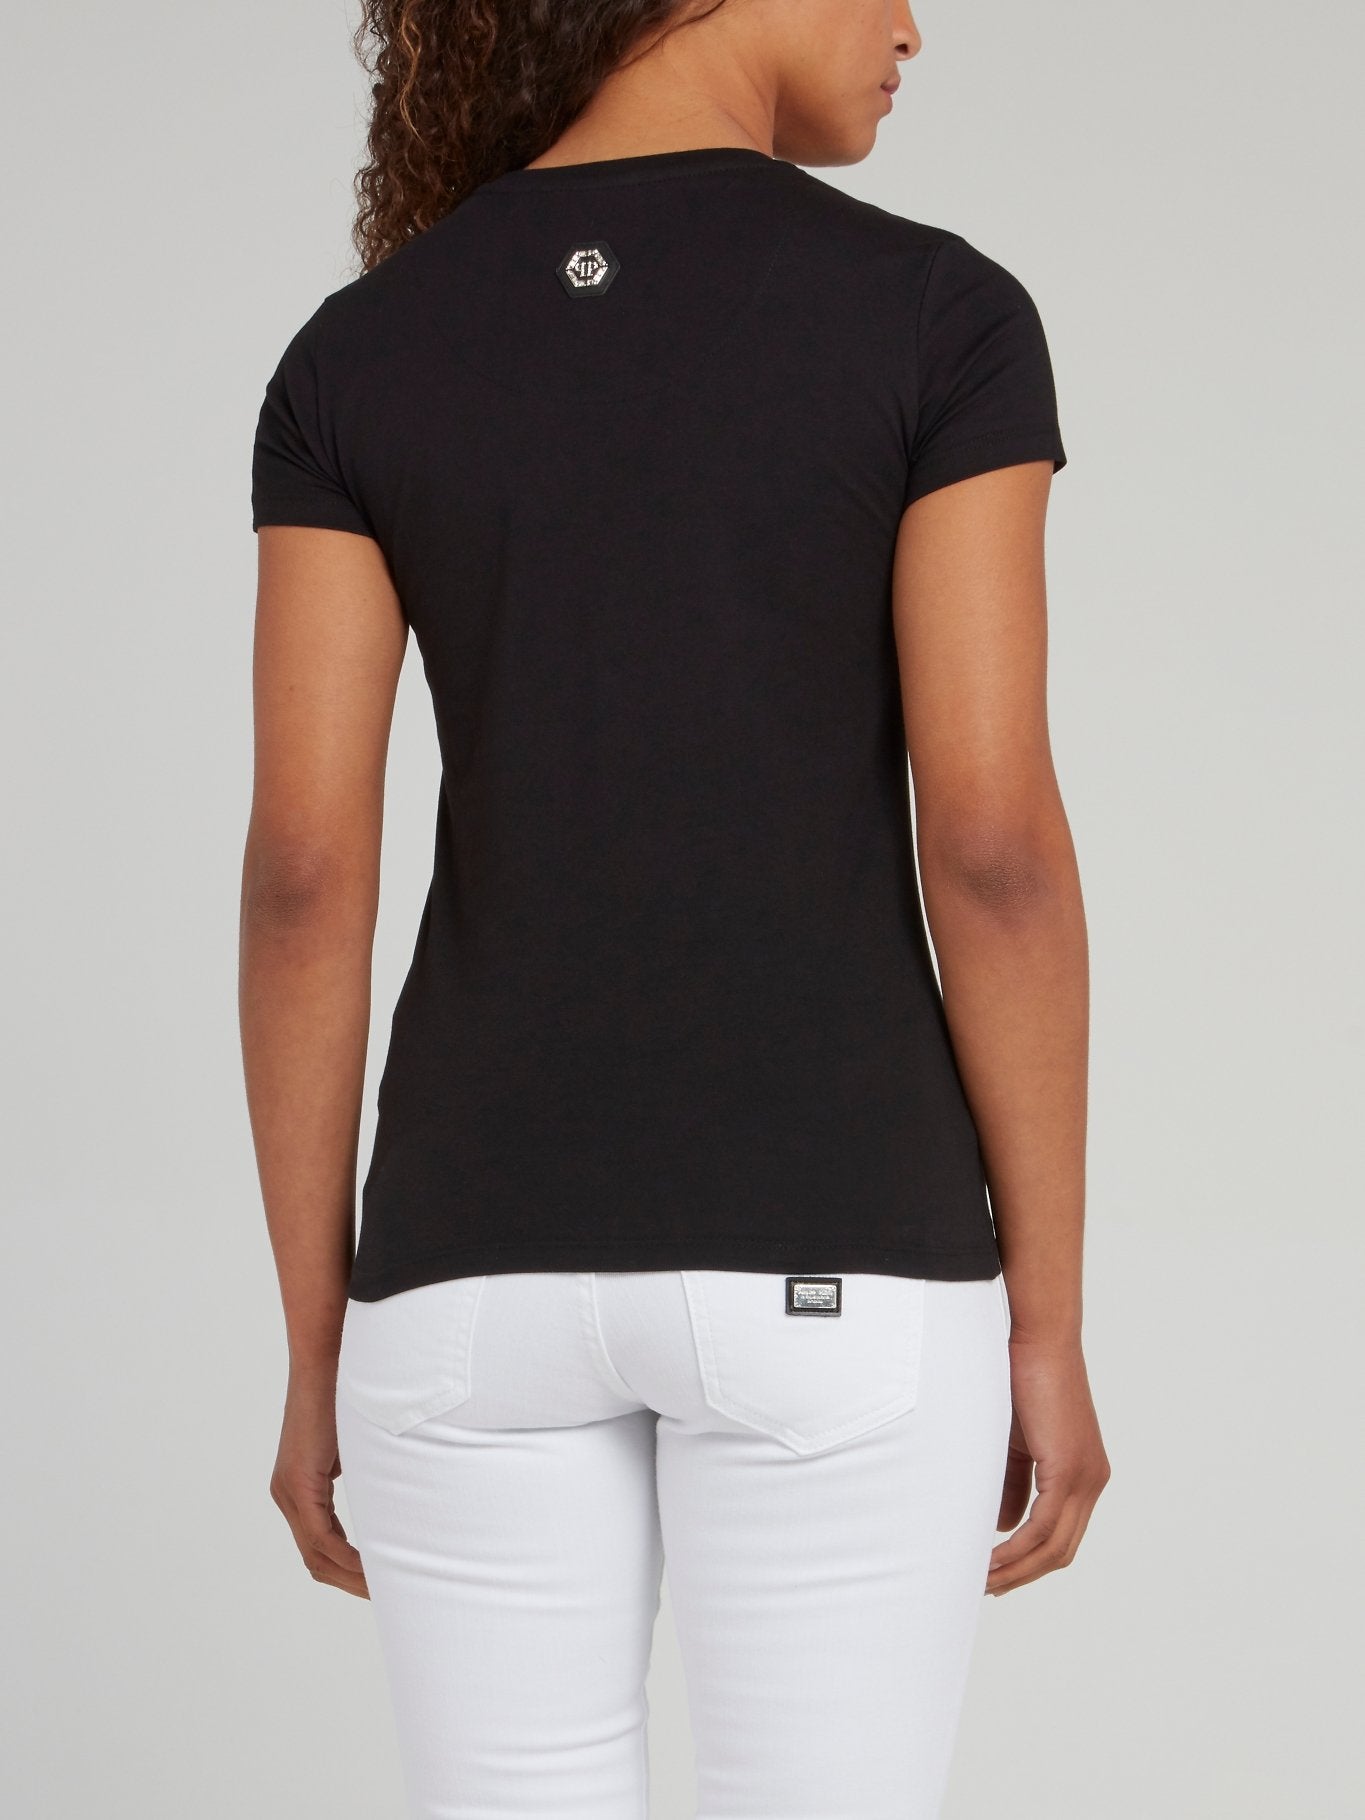 Studded Logo Fitted Cotton Shirt